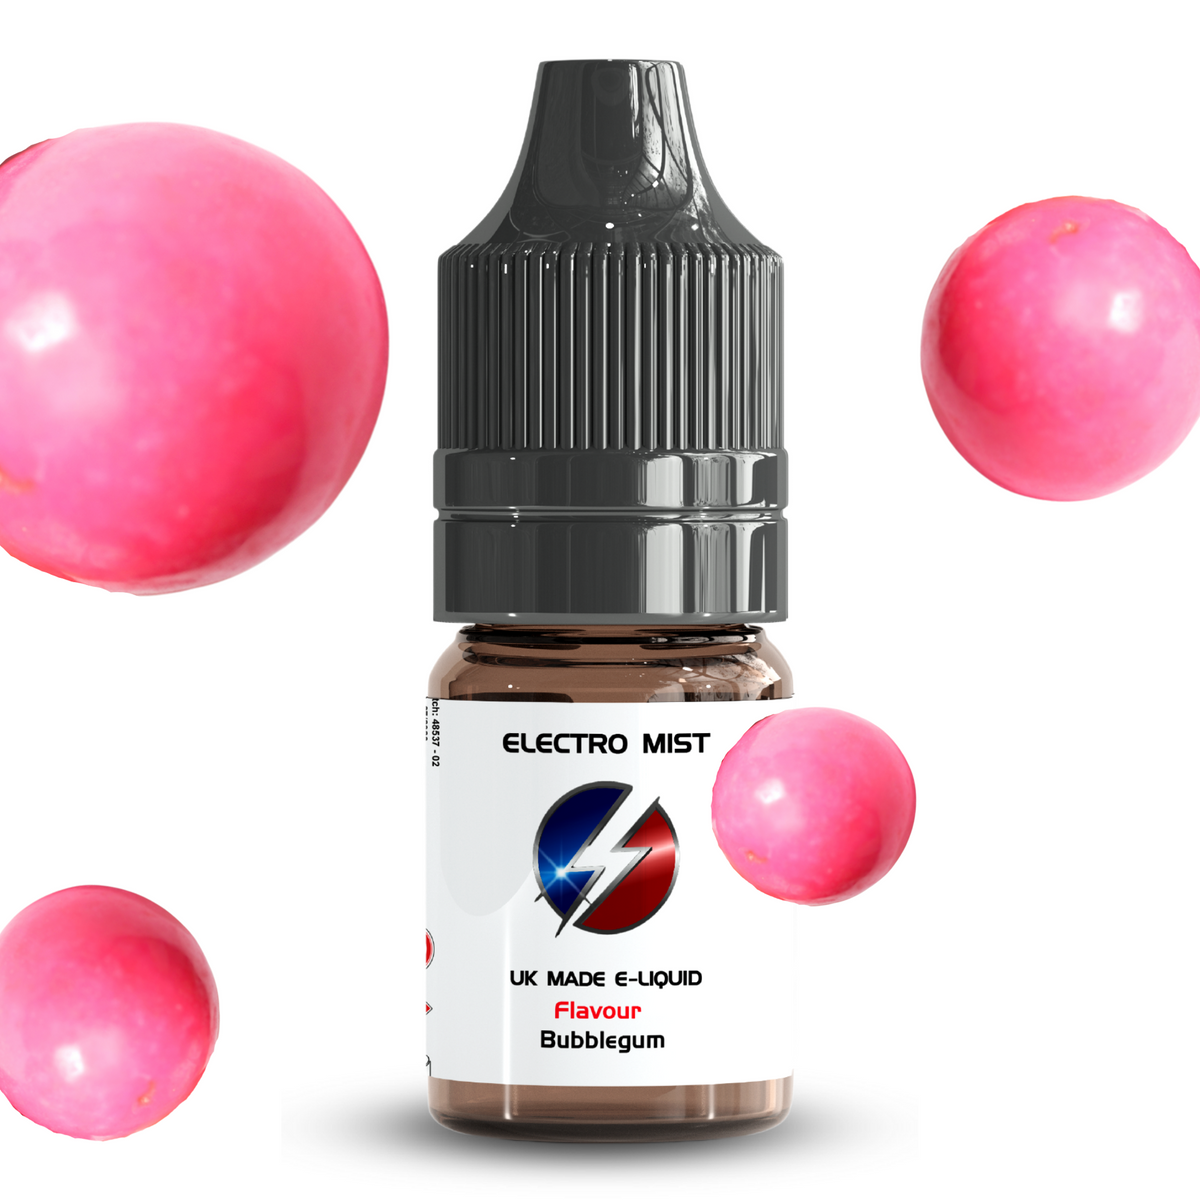 Electromist, the e-liquid brand you can trust. Get your taste buds ready for a flavour sensation, Bubblegum. Nicotine Content: 3mg/6mg/12mg. Products may contain nicotine. For over 18s Only ejuice, vape pen, eliquid, e cigarette, 10ml, vaping, cloud, PG, VG, 60/40, vape liquid, Flavour